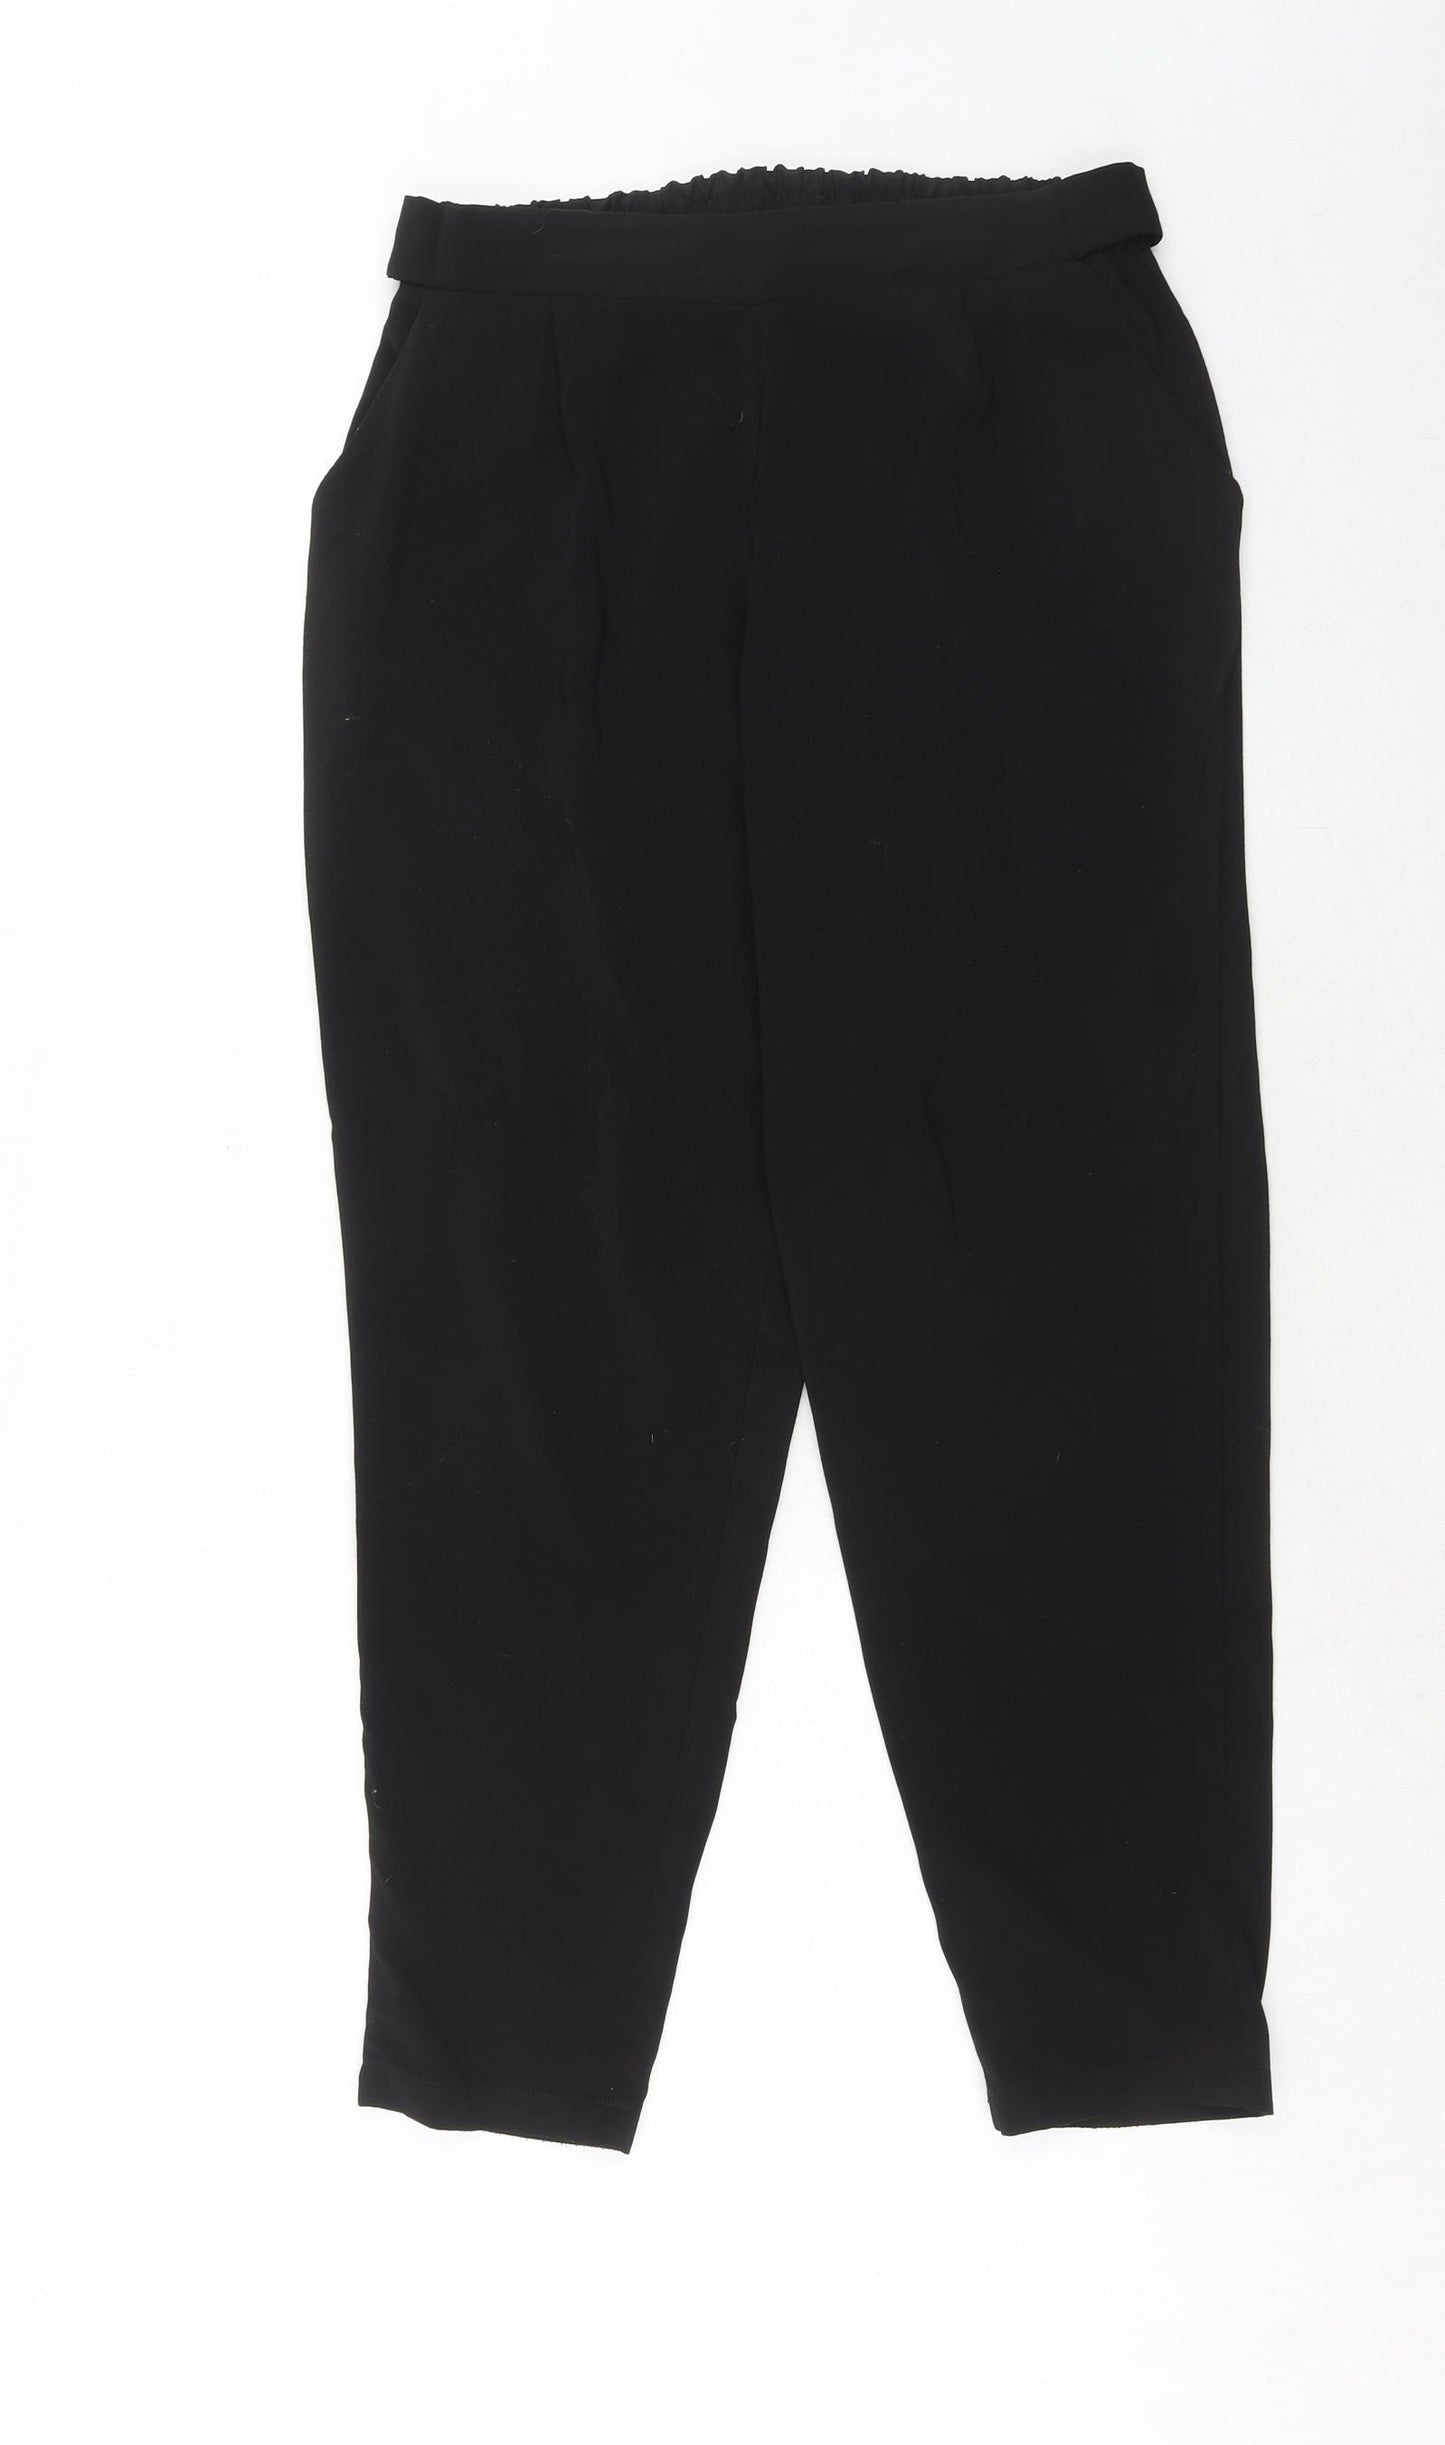 Evans Womens Black Polyester Trousers Size 14 Regular Tie